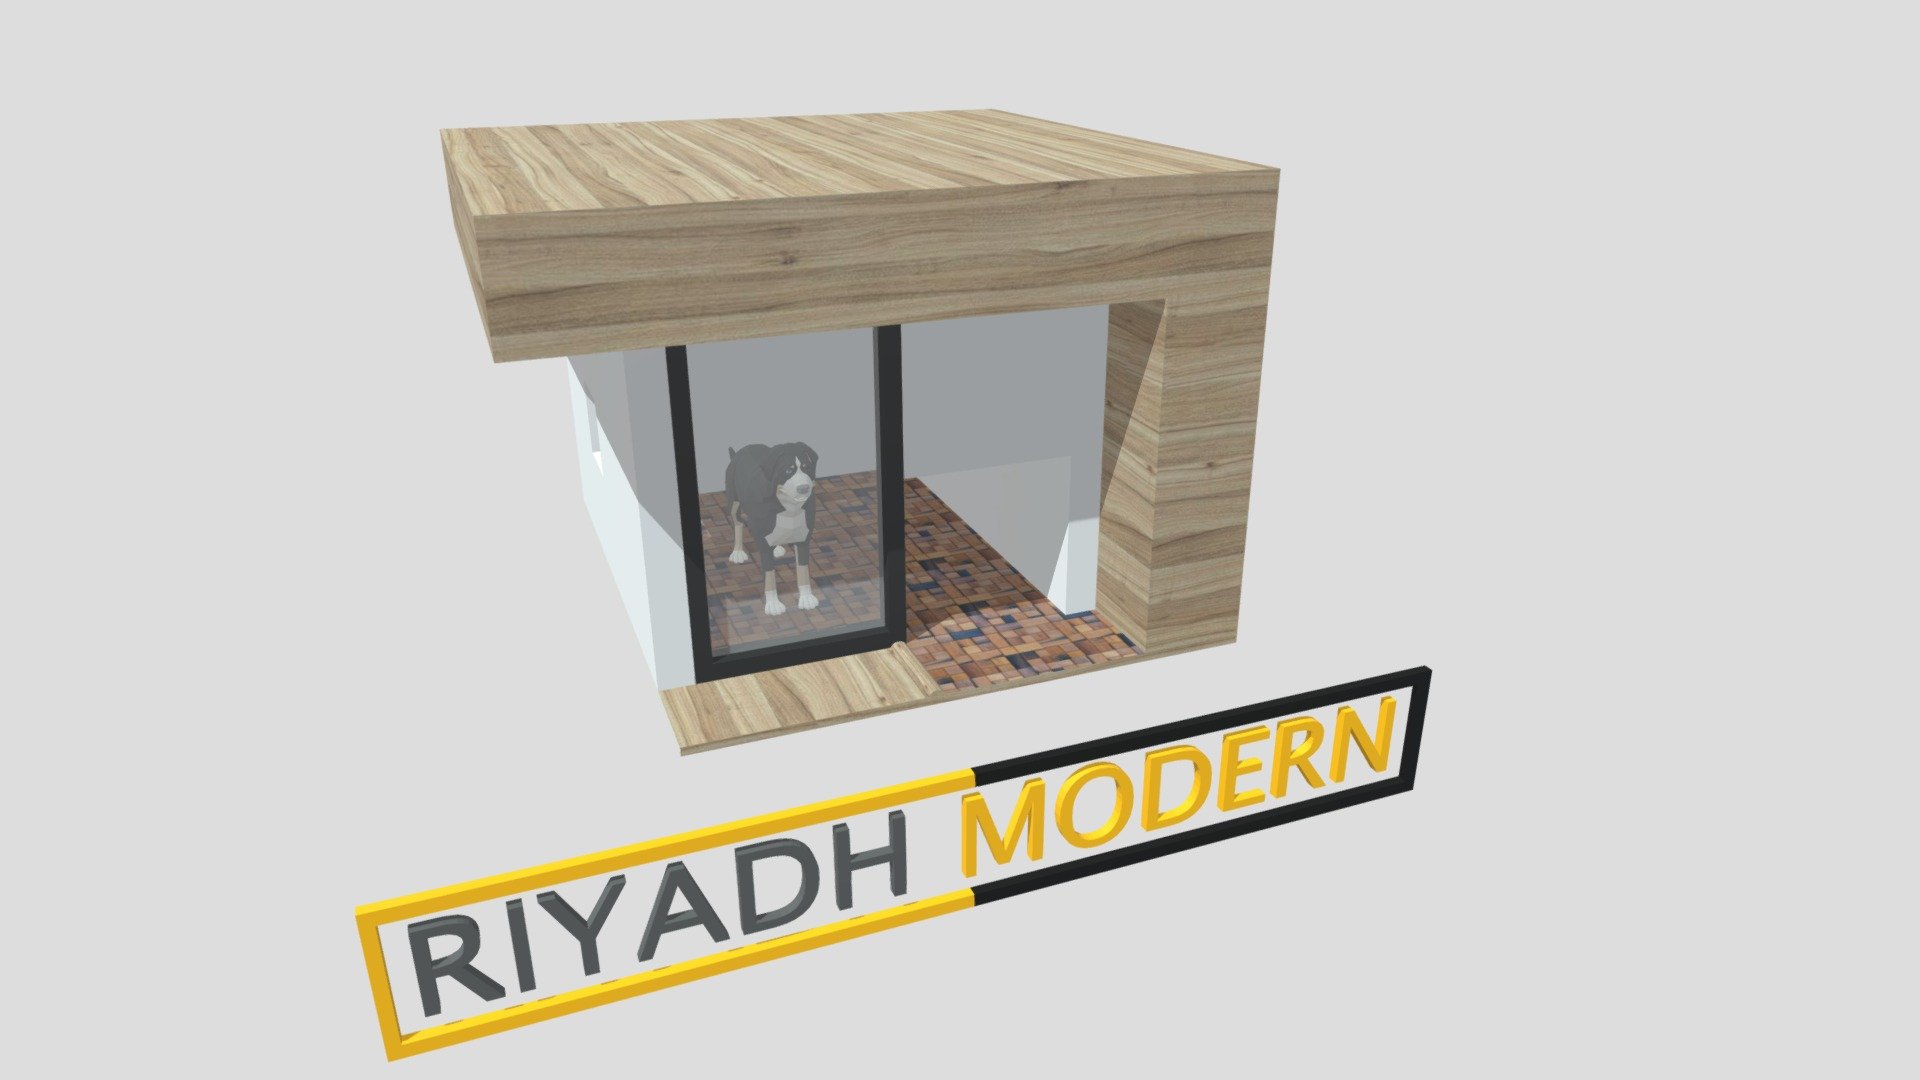 Modern doghouse
The front bottle is designed to match the design of the modern home, and is very simple and attractive, and helps ventilation to and from the window, and the front bottle provides an aesthetic vision.
Hope you like it :) - HOME DOG MODERN - Download Free 3D model by Riyadh Modern (@naif6633) 3d model